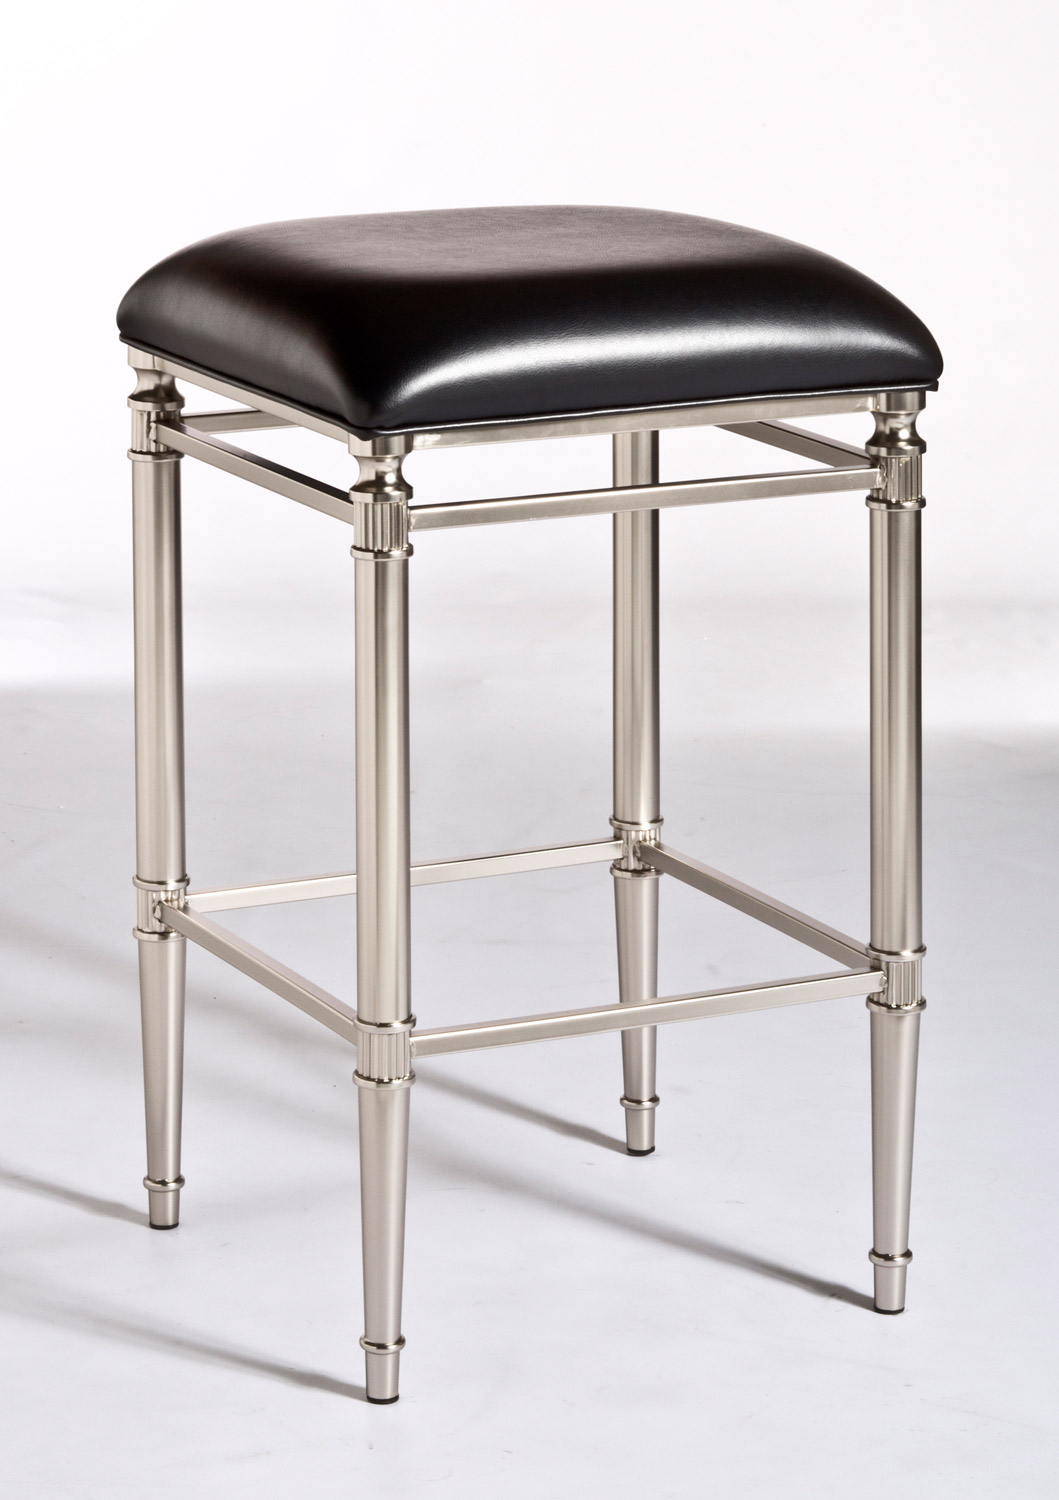 Hillsdale Riverside Non-Swivel Backless Counter Stool - Dull Nickel